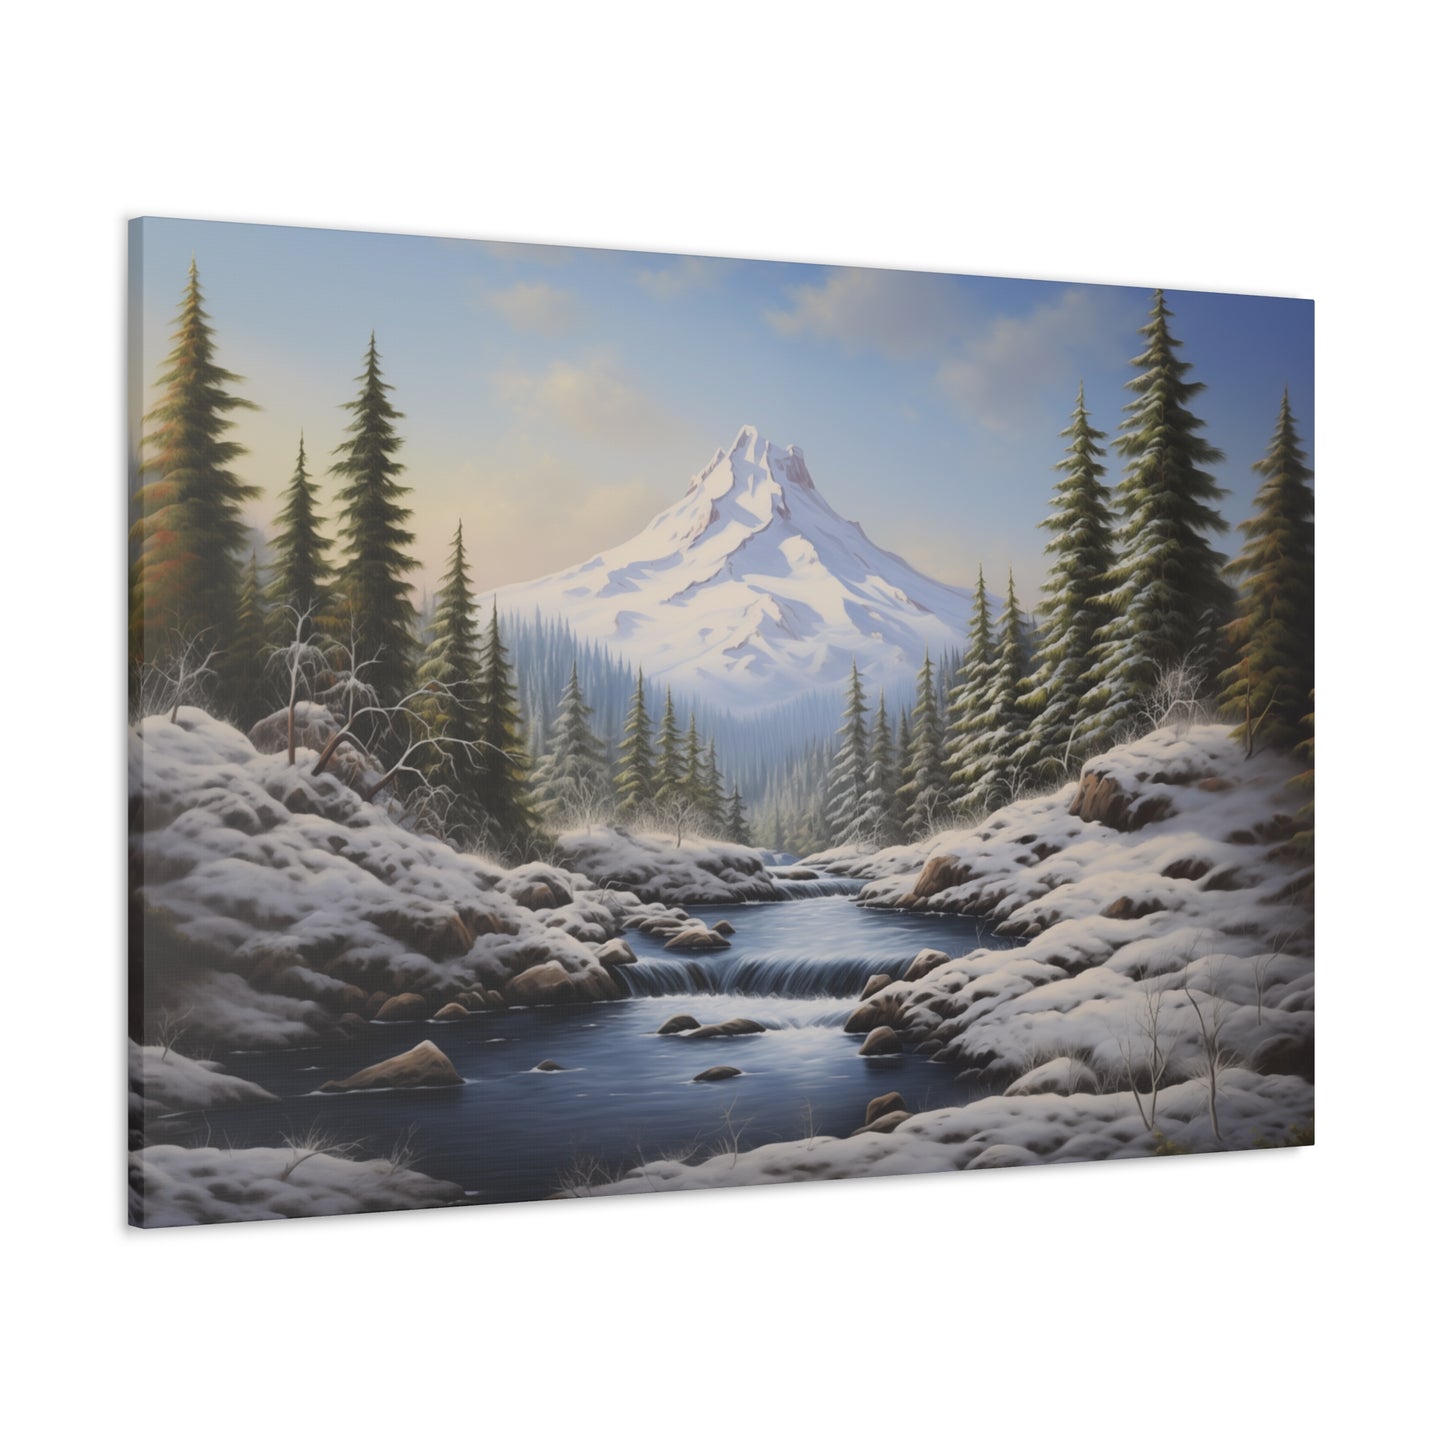 Mount Hood - Canvas Gallery Wrap - No Frame